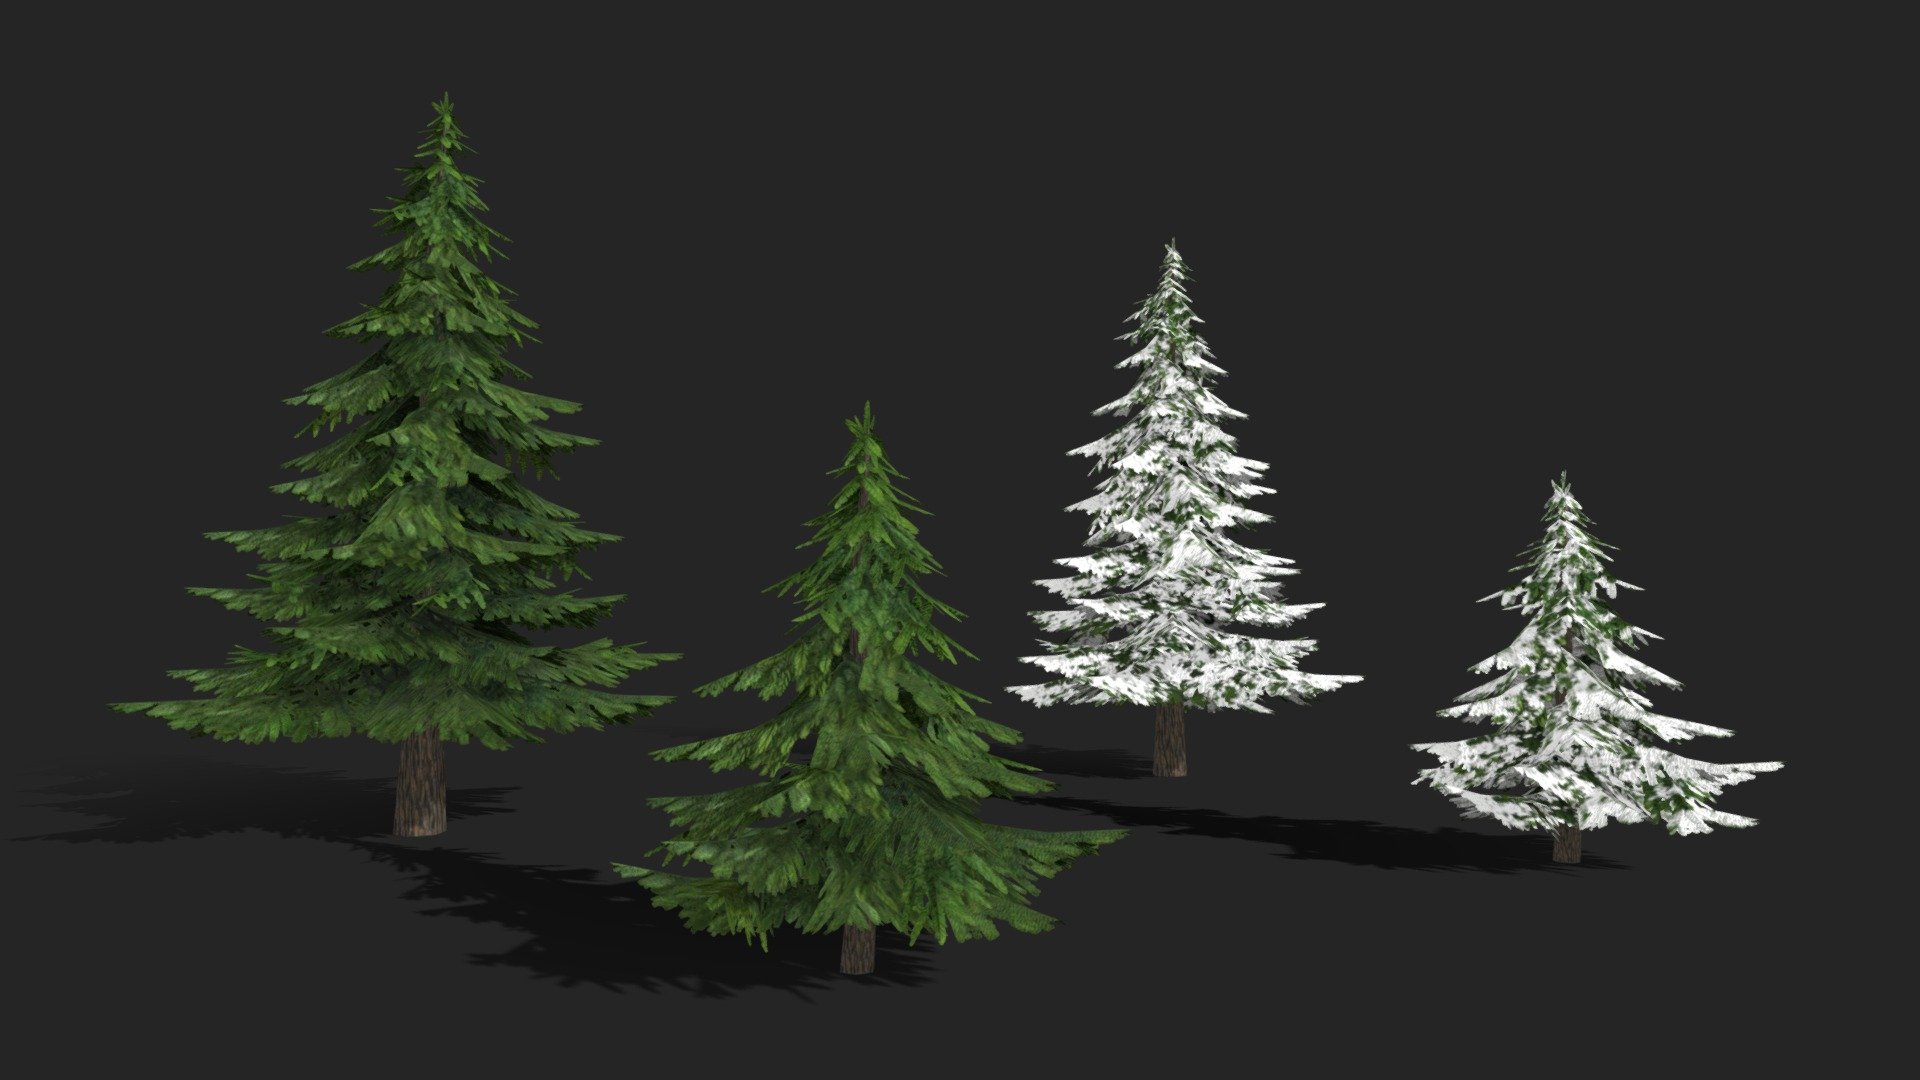 DISCOUNT - separate models are worth $10 each, but buying this model will save you $15!

Looking for stunning 3D models for your game or project? Check out our 3D low poly fir tree models set! Perfect for game development, real-time environments, or background use, these models are optimized for seamless integration into any game engine without sacrificing visual quality. Whether you need to create complex scenes or simple landscapes, these models will elevate your project to the next level. Don't miss out on this opportunity to enhance your project with our high-quality 3D models!

Big Fir Tree:

774 polygons

1141 vertices

2 mesh objects

Snow version of the texture

Small Fir Tree:

376 polygons

578 vertices

2 mesh objects

Snow version of the texture

Both models are centered at 0,0,0 origin.

All textures are in 512 x 512 resolution (for even better game optimization).

Models have real-world scales. Measurement unit used for models: Meters.  

Good Luck! - Fir Trees (LowPoly) - Buy Royalty Free 3D model by Flystyler 3d model